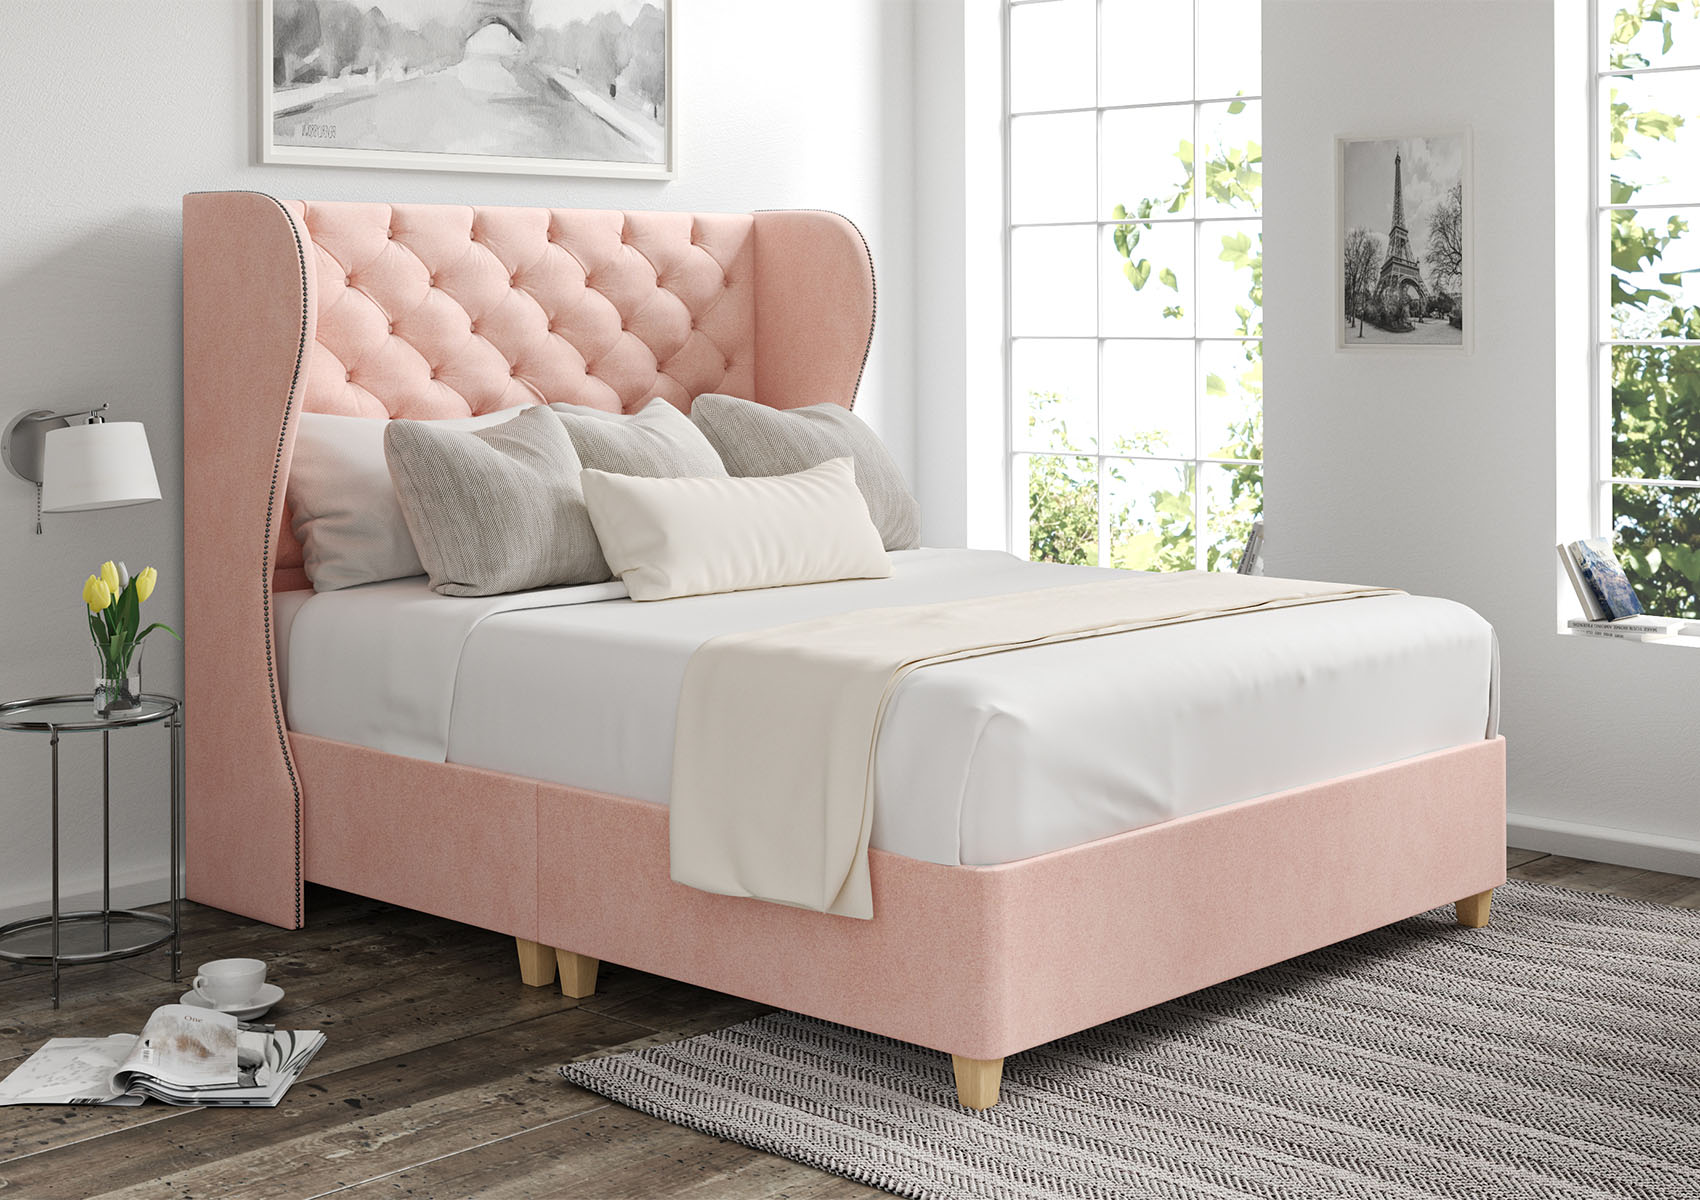 View Miami Teddy Cream Upholstered Super King Winged Bed Time4Sleep information